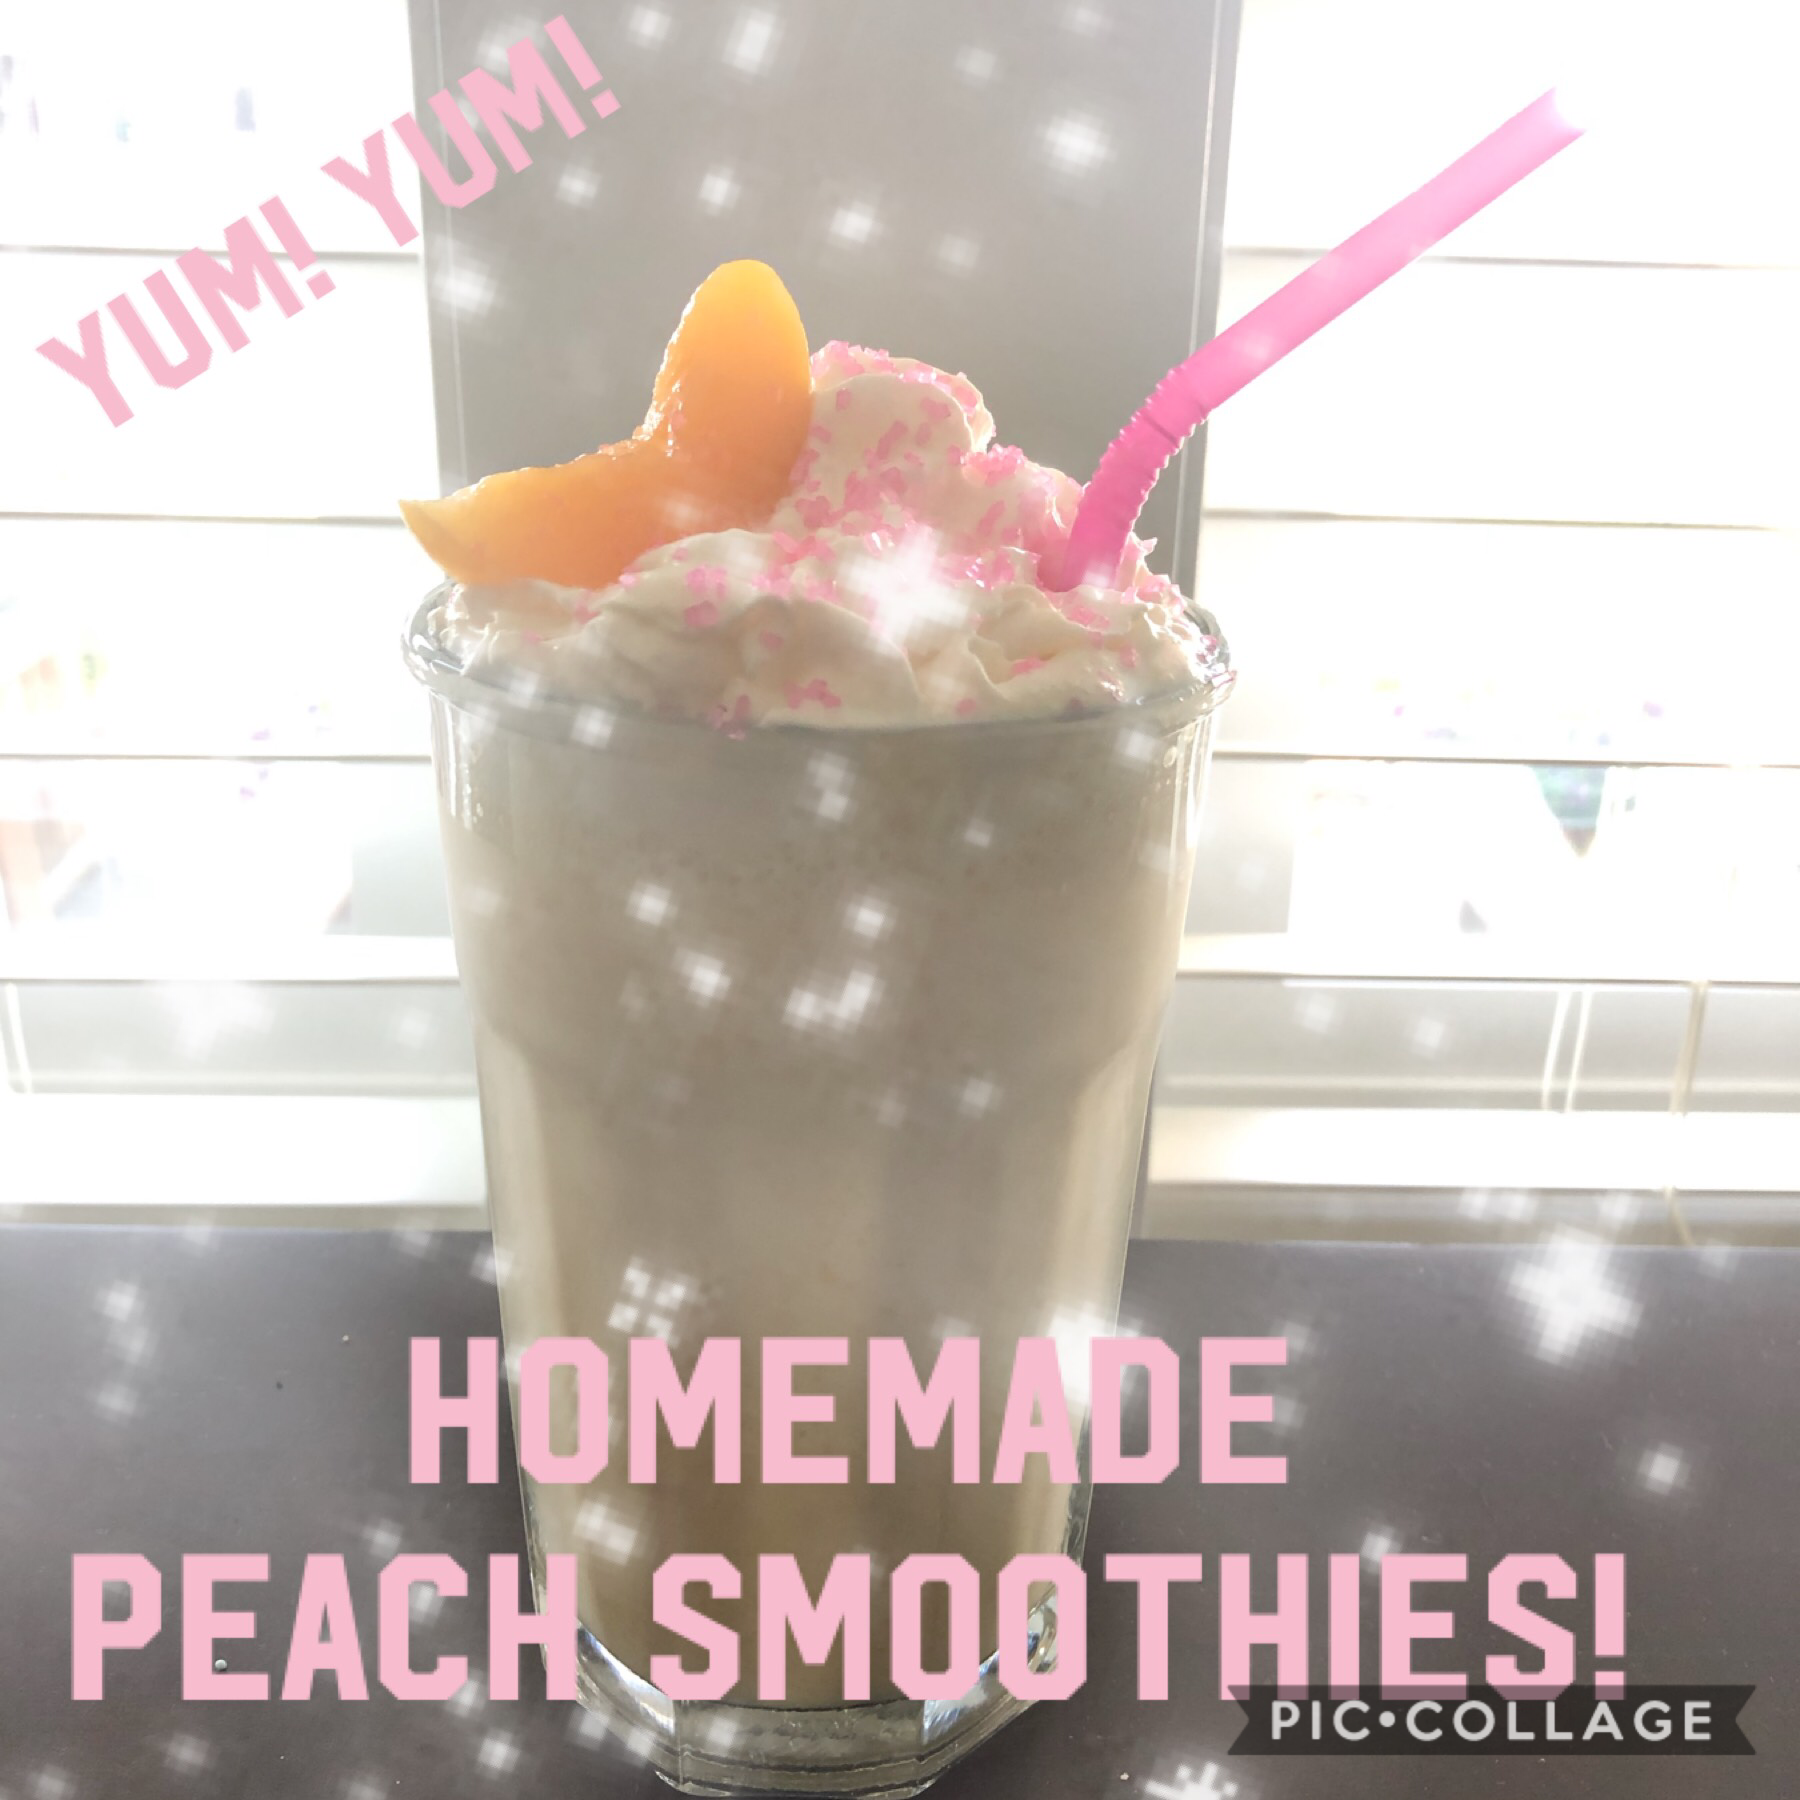 • add vanilla or strawberry ice cream or sorbet into blender.
• add any amount of peaches depending on how much of a peachy flavour you want.
• Blend and put in cup
• Add whipped cream and one peach slice
• Add pink sprinkles and a pink straw 